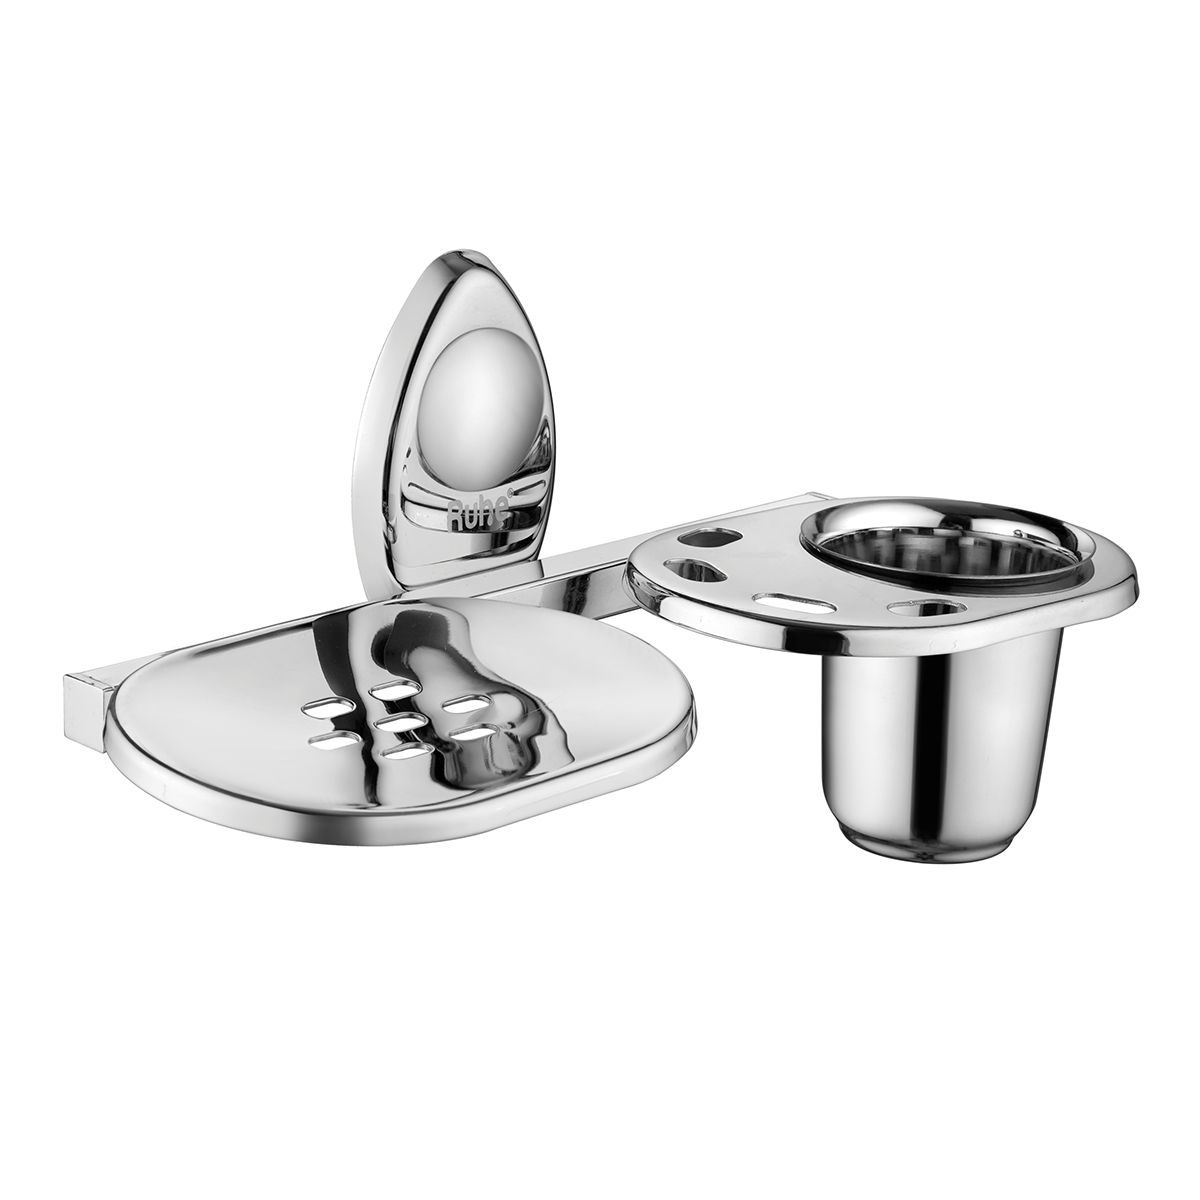 Drop Stainless Steel Soap Dish with Tumbler Holder